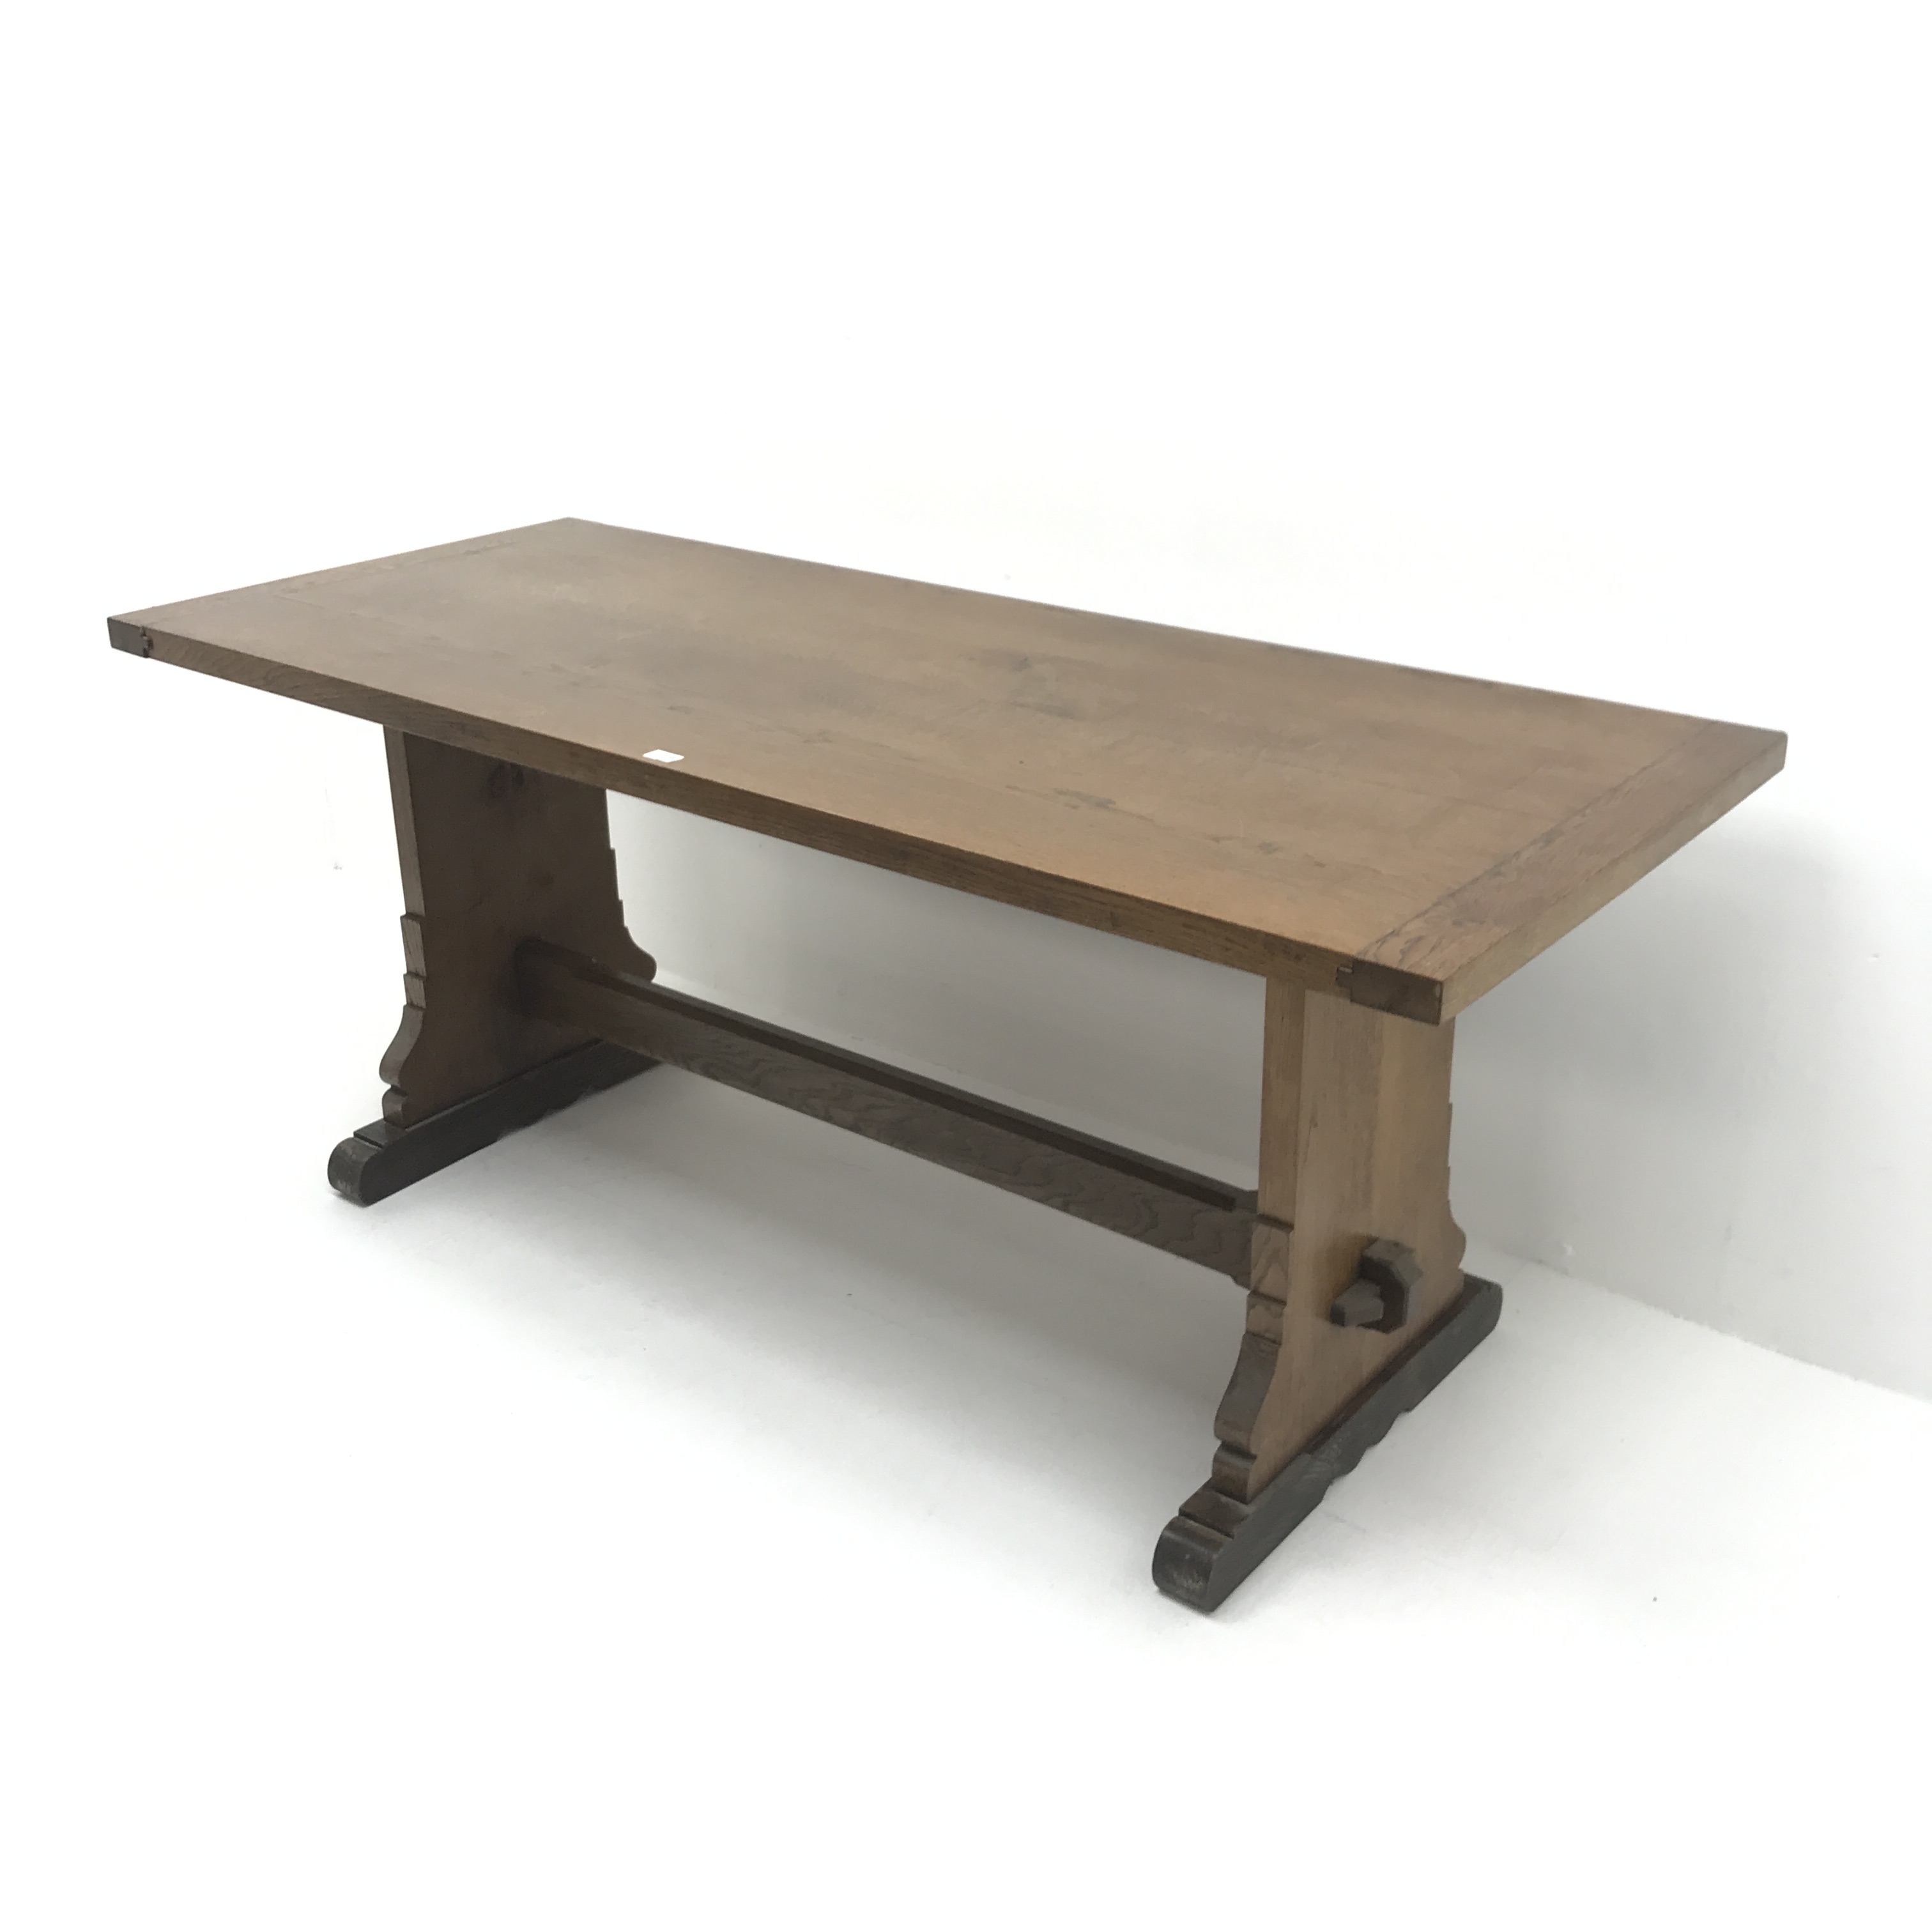 20th century oak refectory table, shaped solid end supports joined by single undertier, sledge feet, - Image 7 of 8